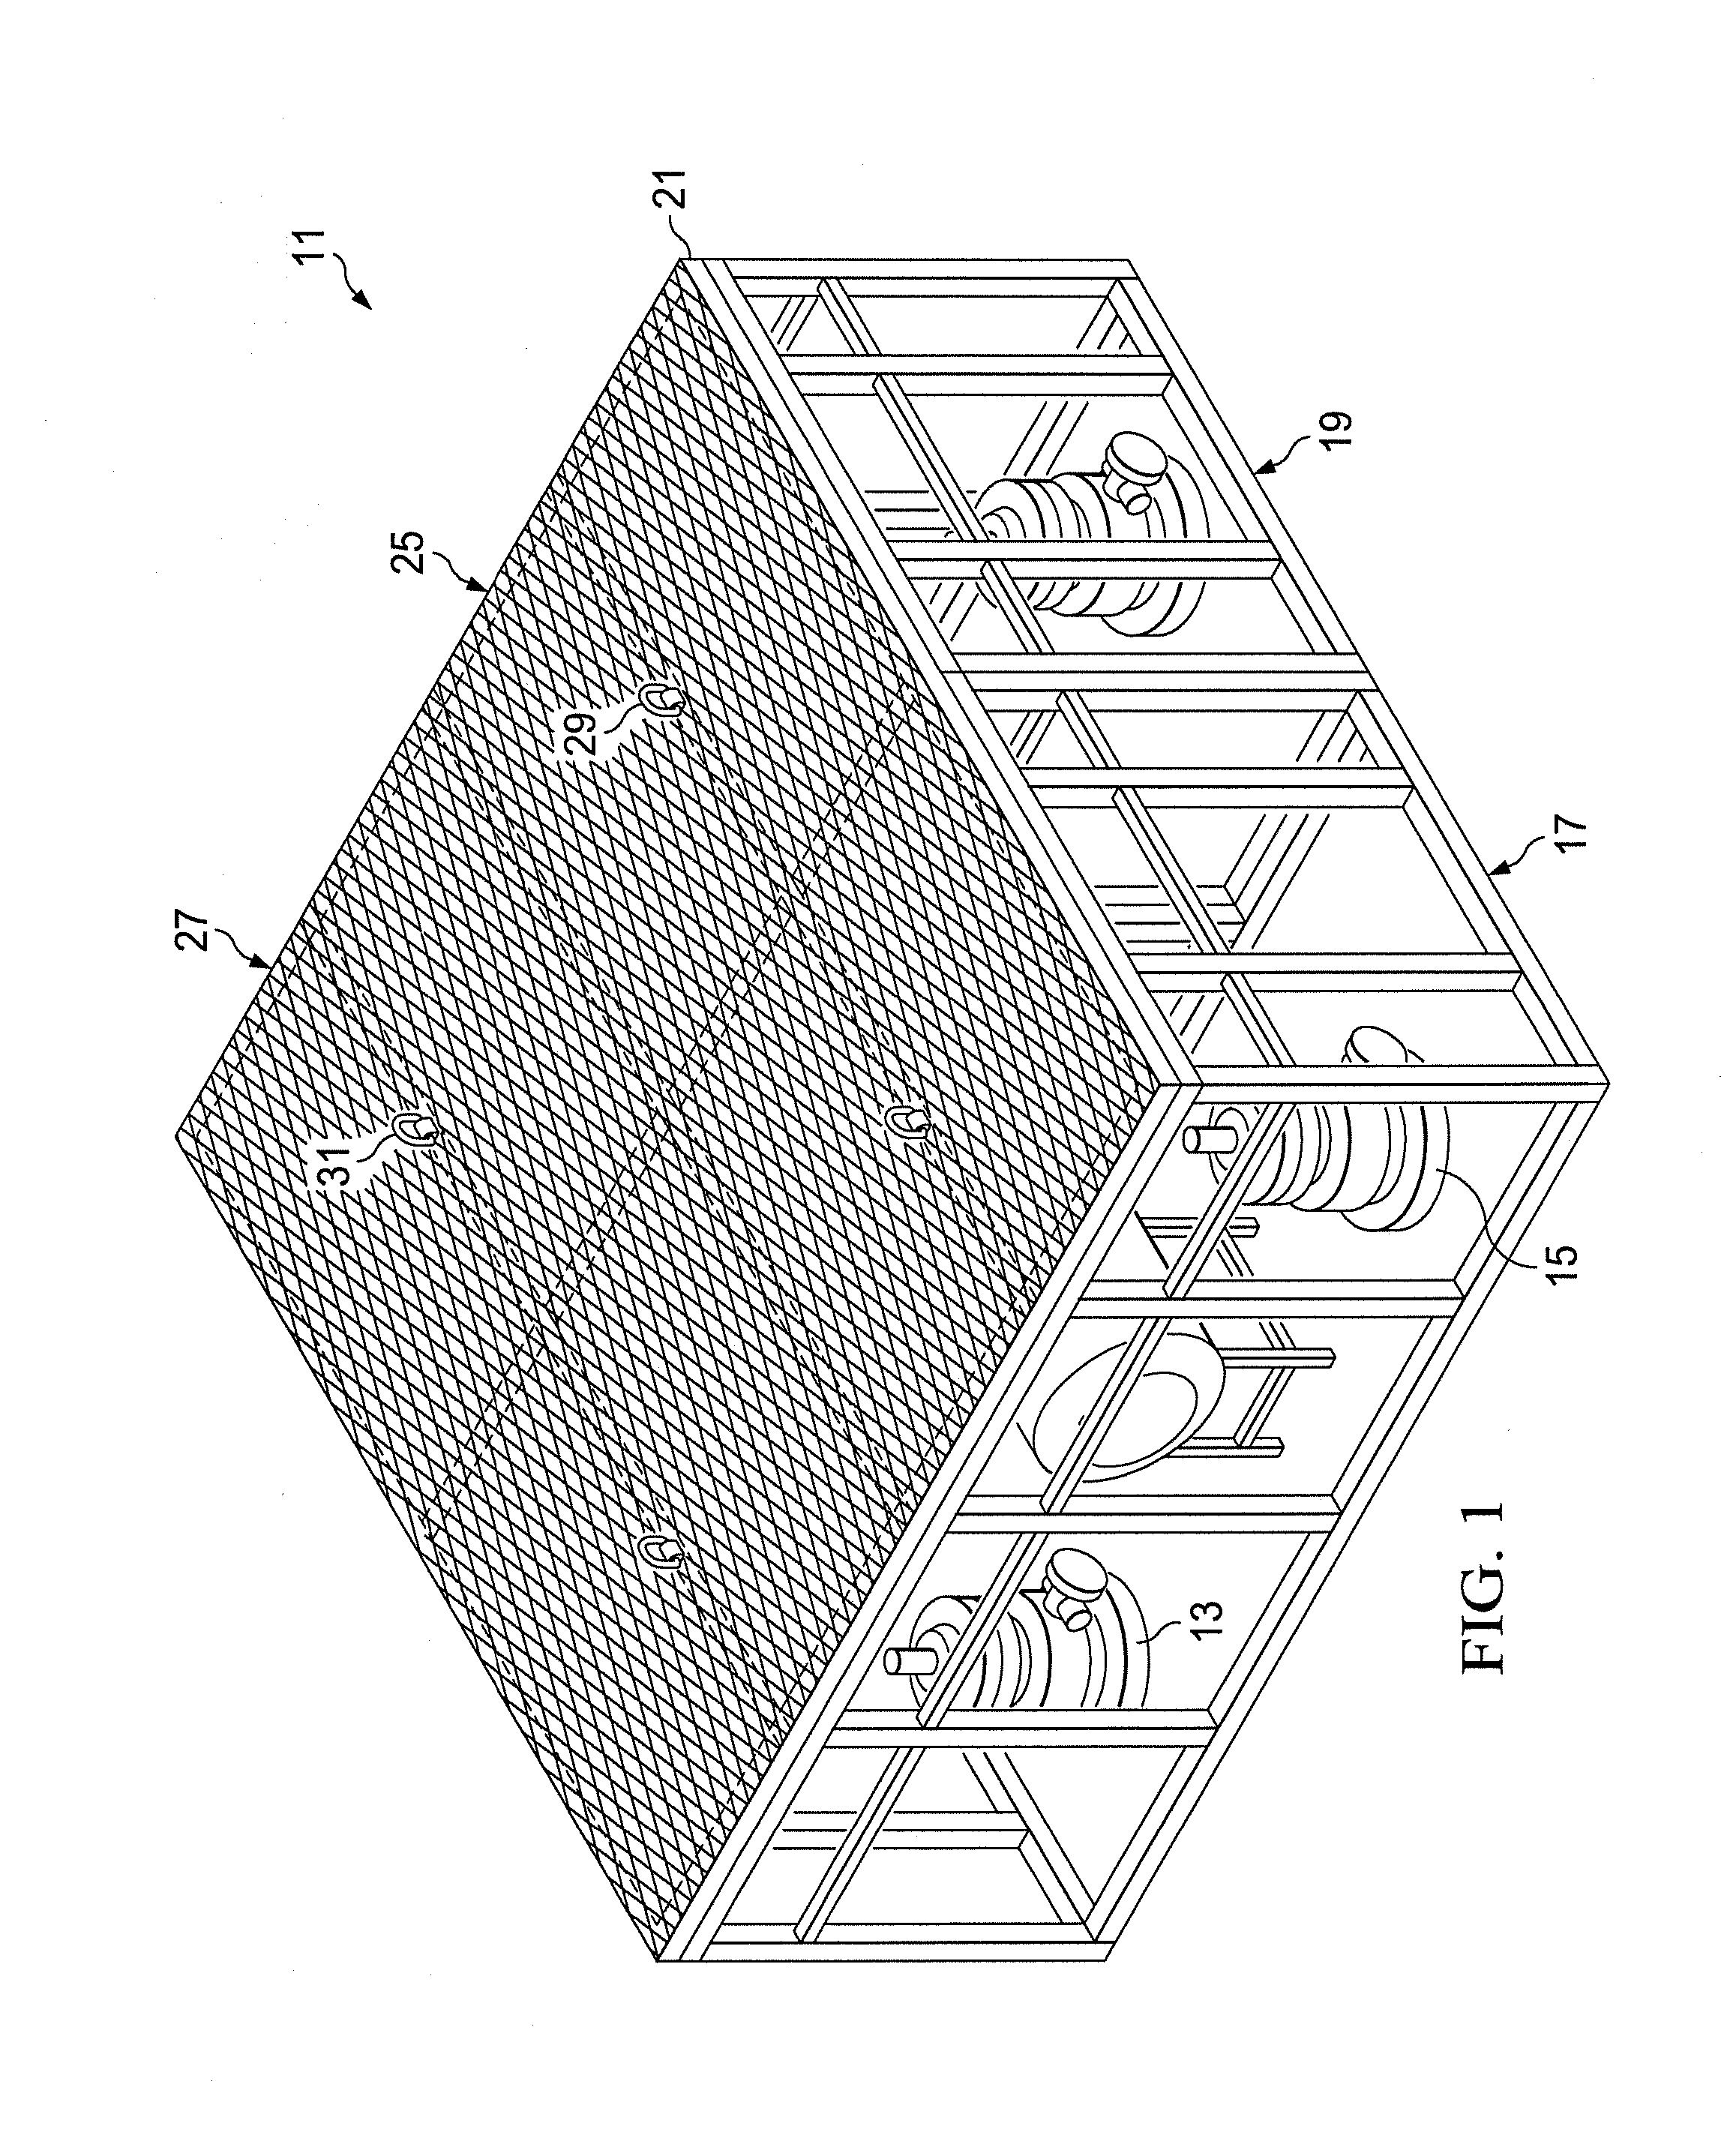 Protective Enclosure for a Wellhead